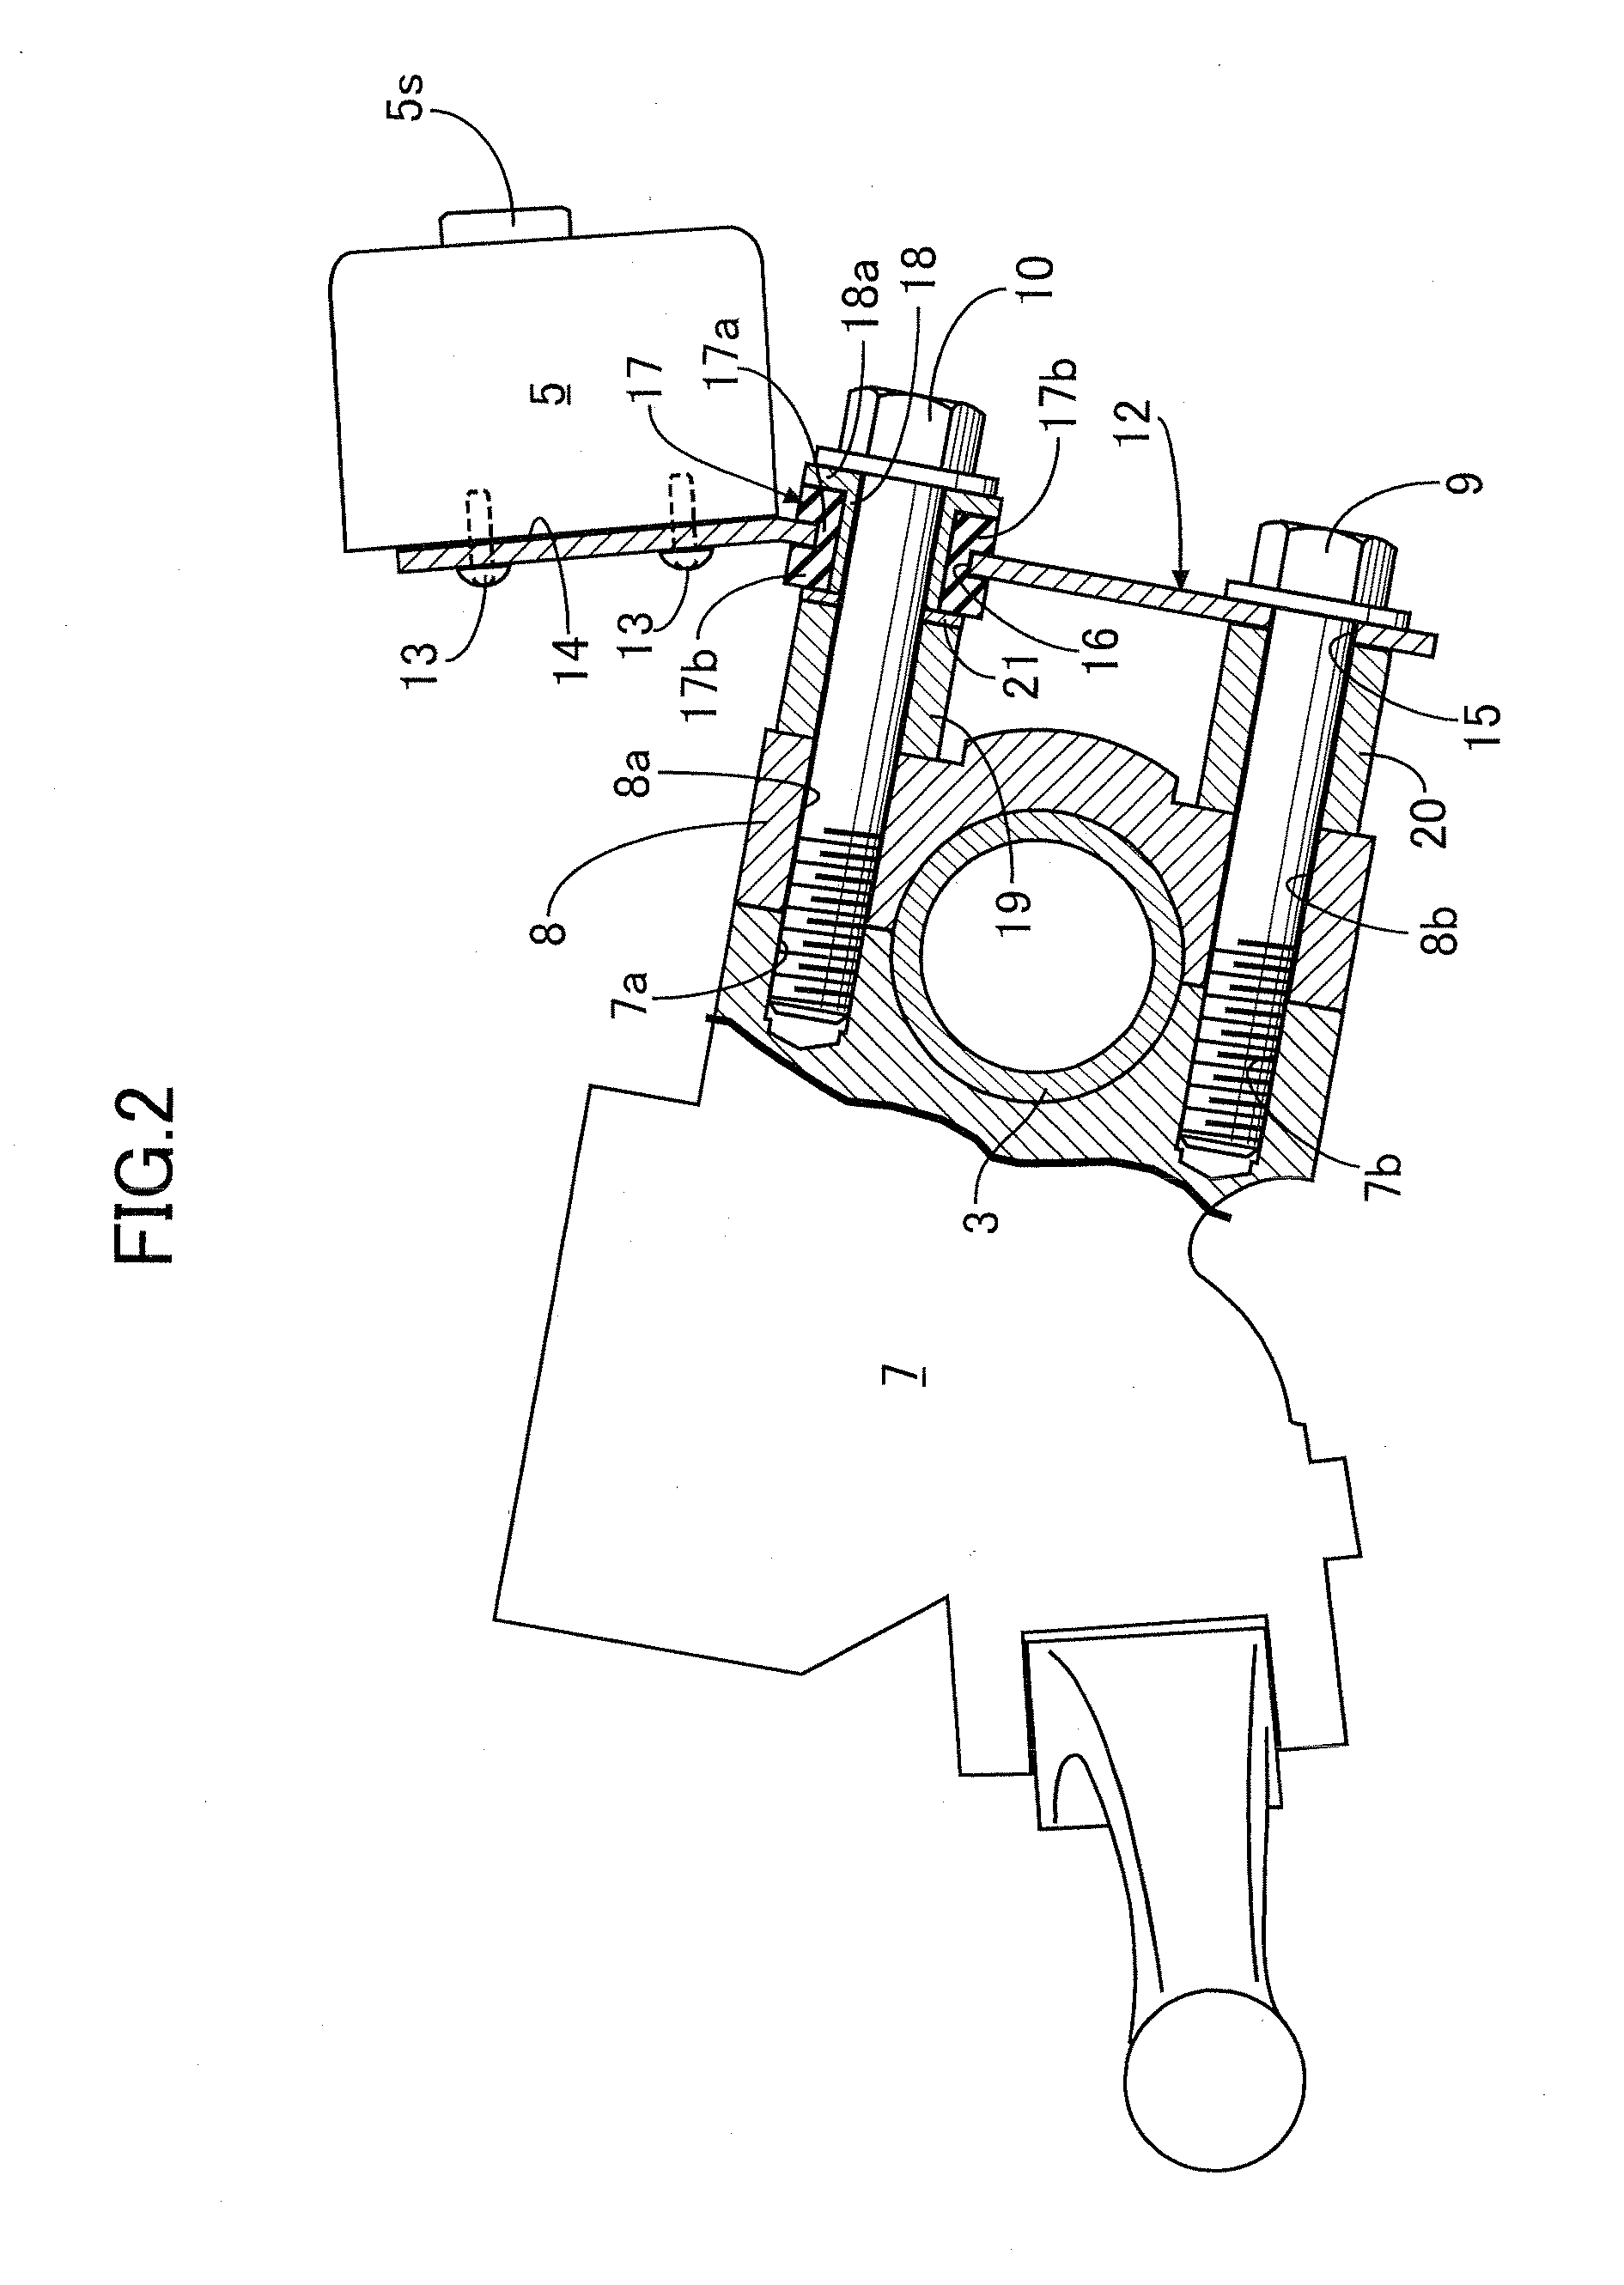 Electrical device mounting structure in motorcycle